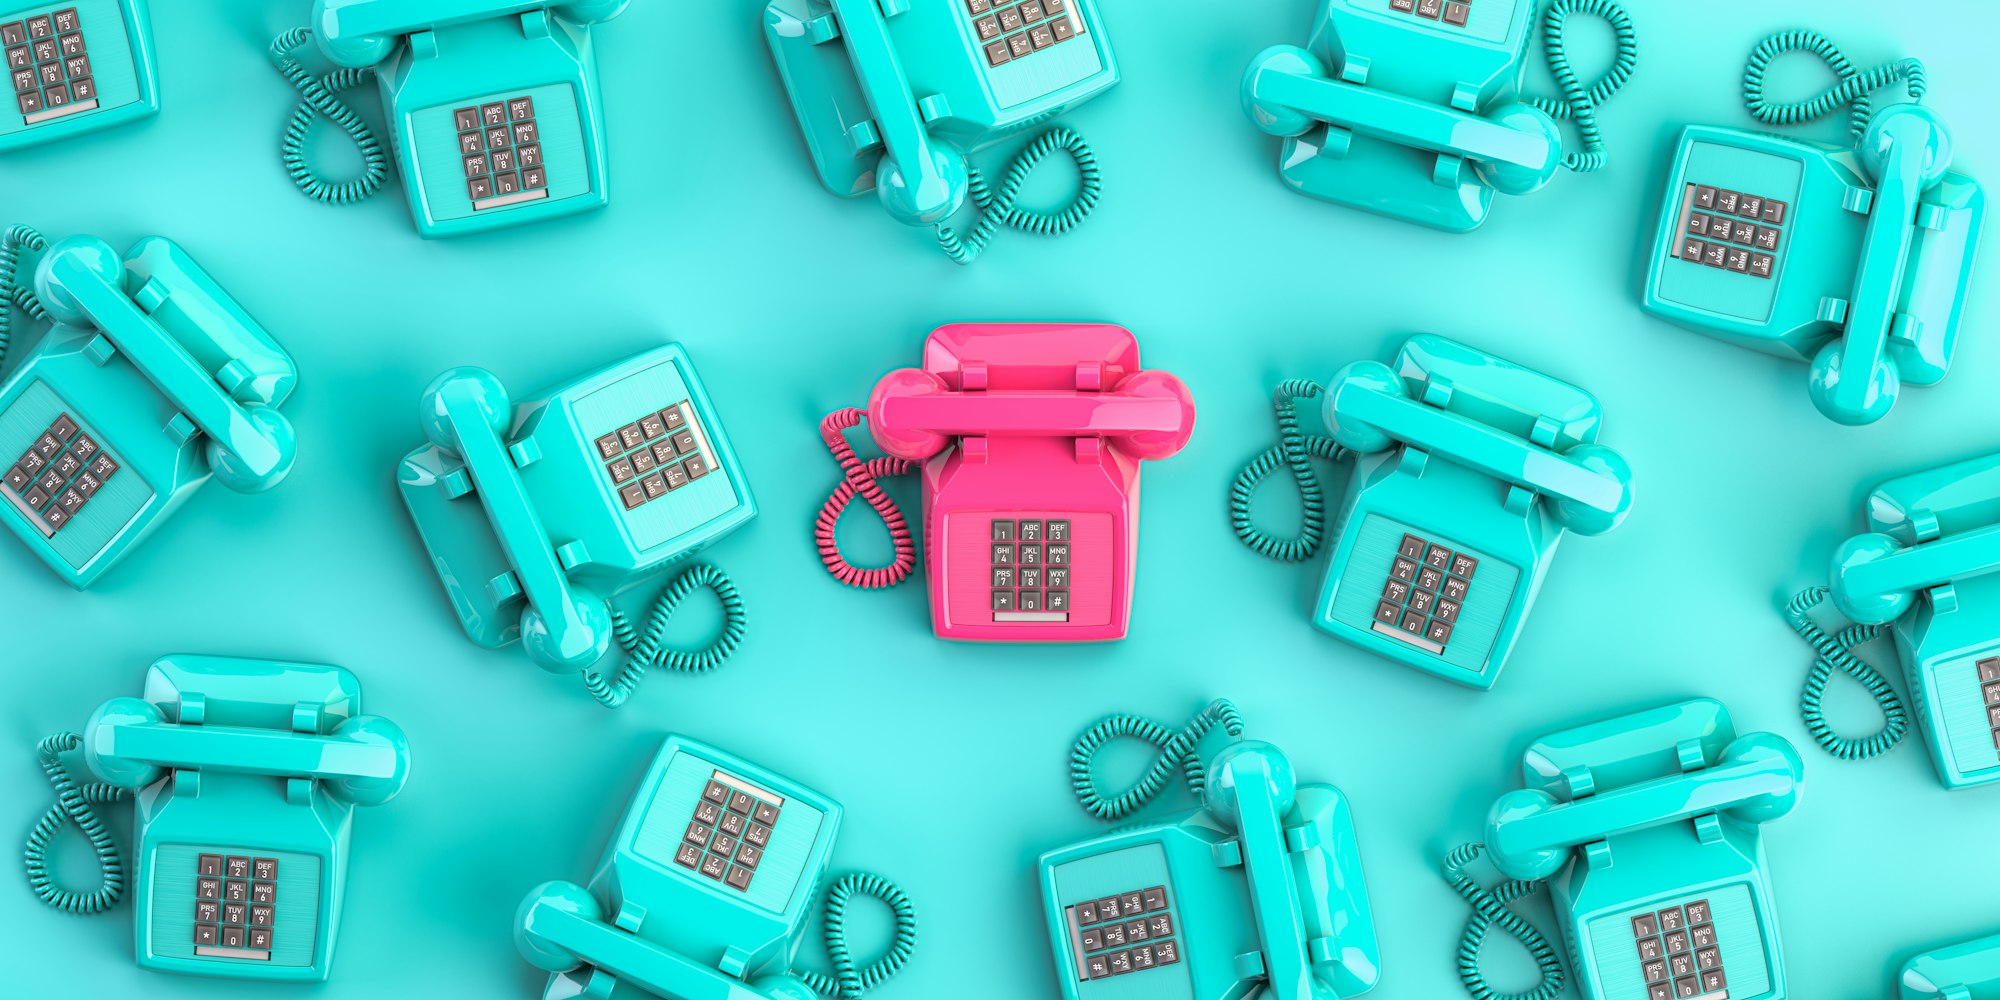 Pink vintage telephone on background from blue retro telephones.